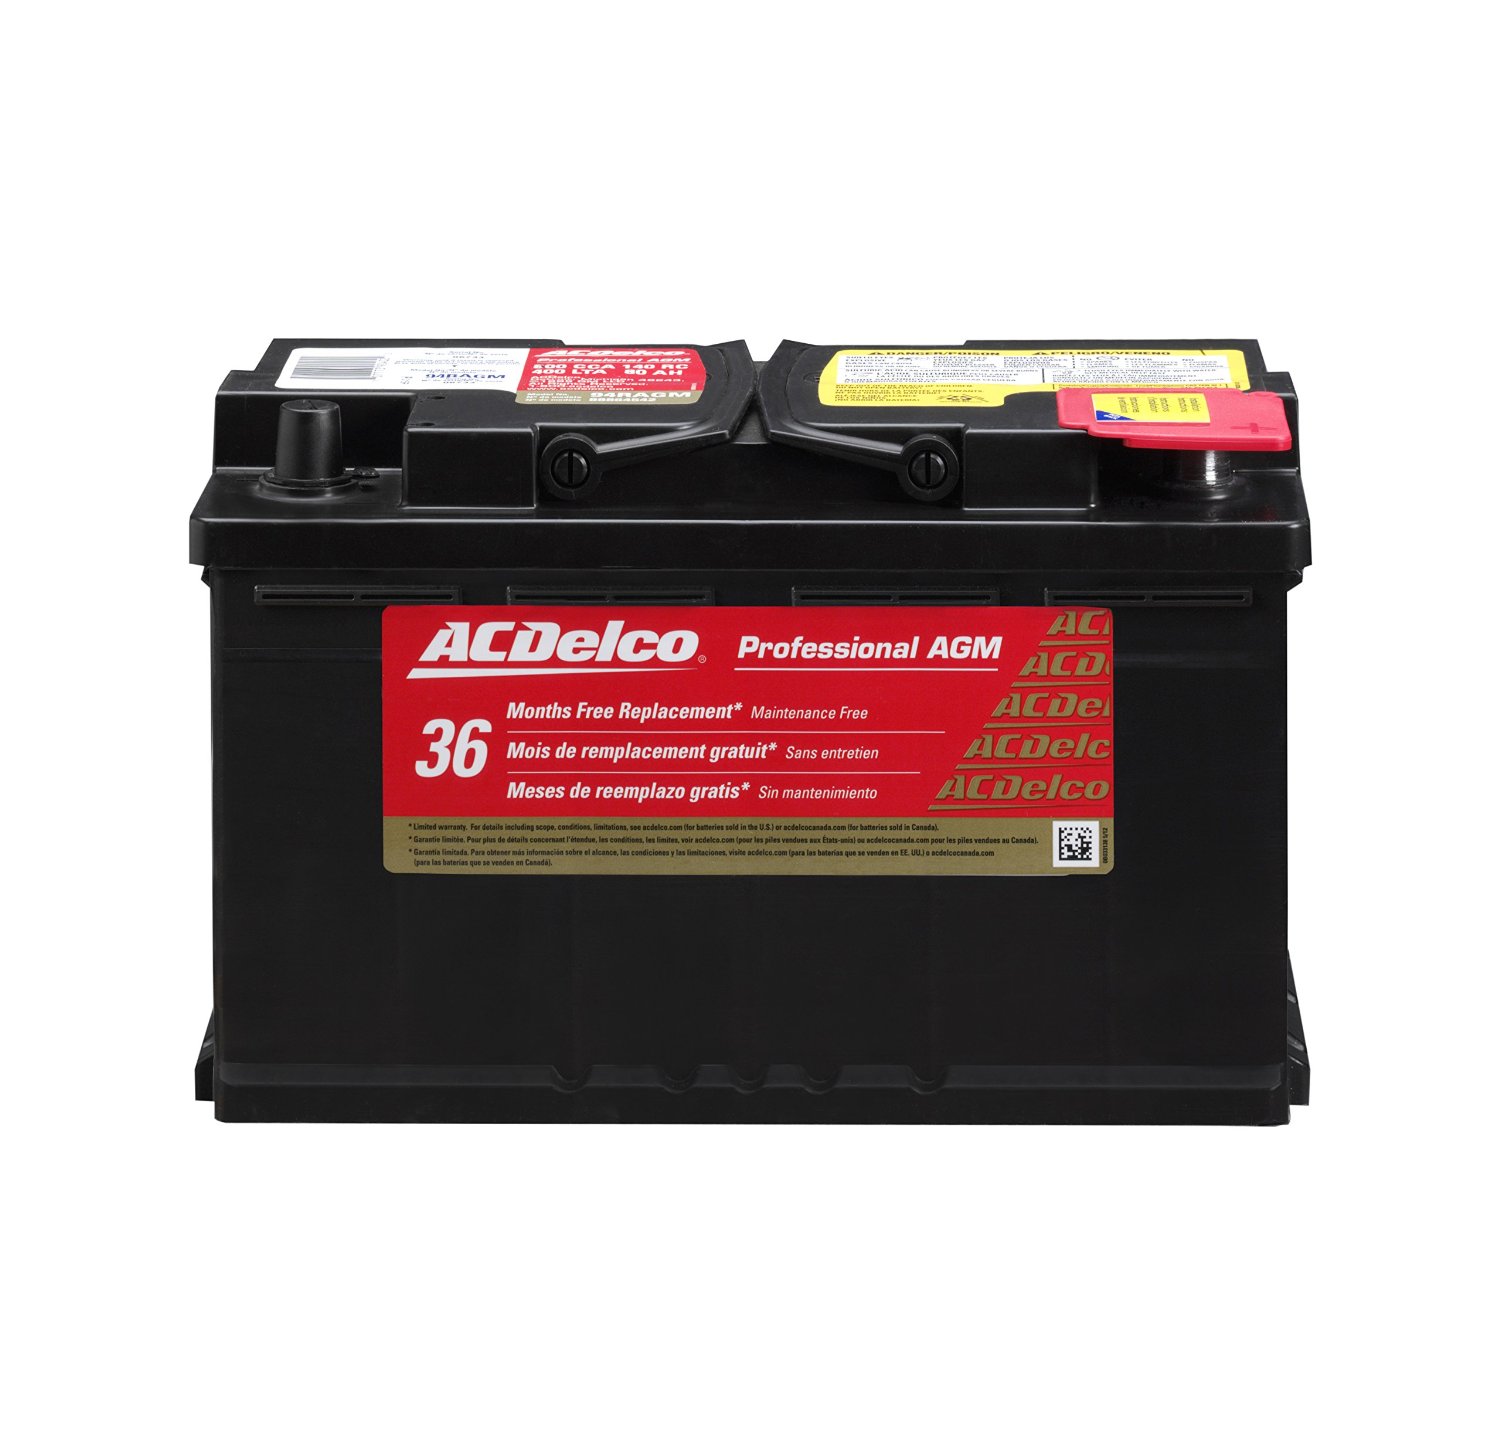 10 Best Batteries For Automotive That Offer Great Performance And Life